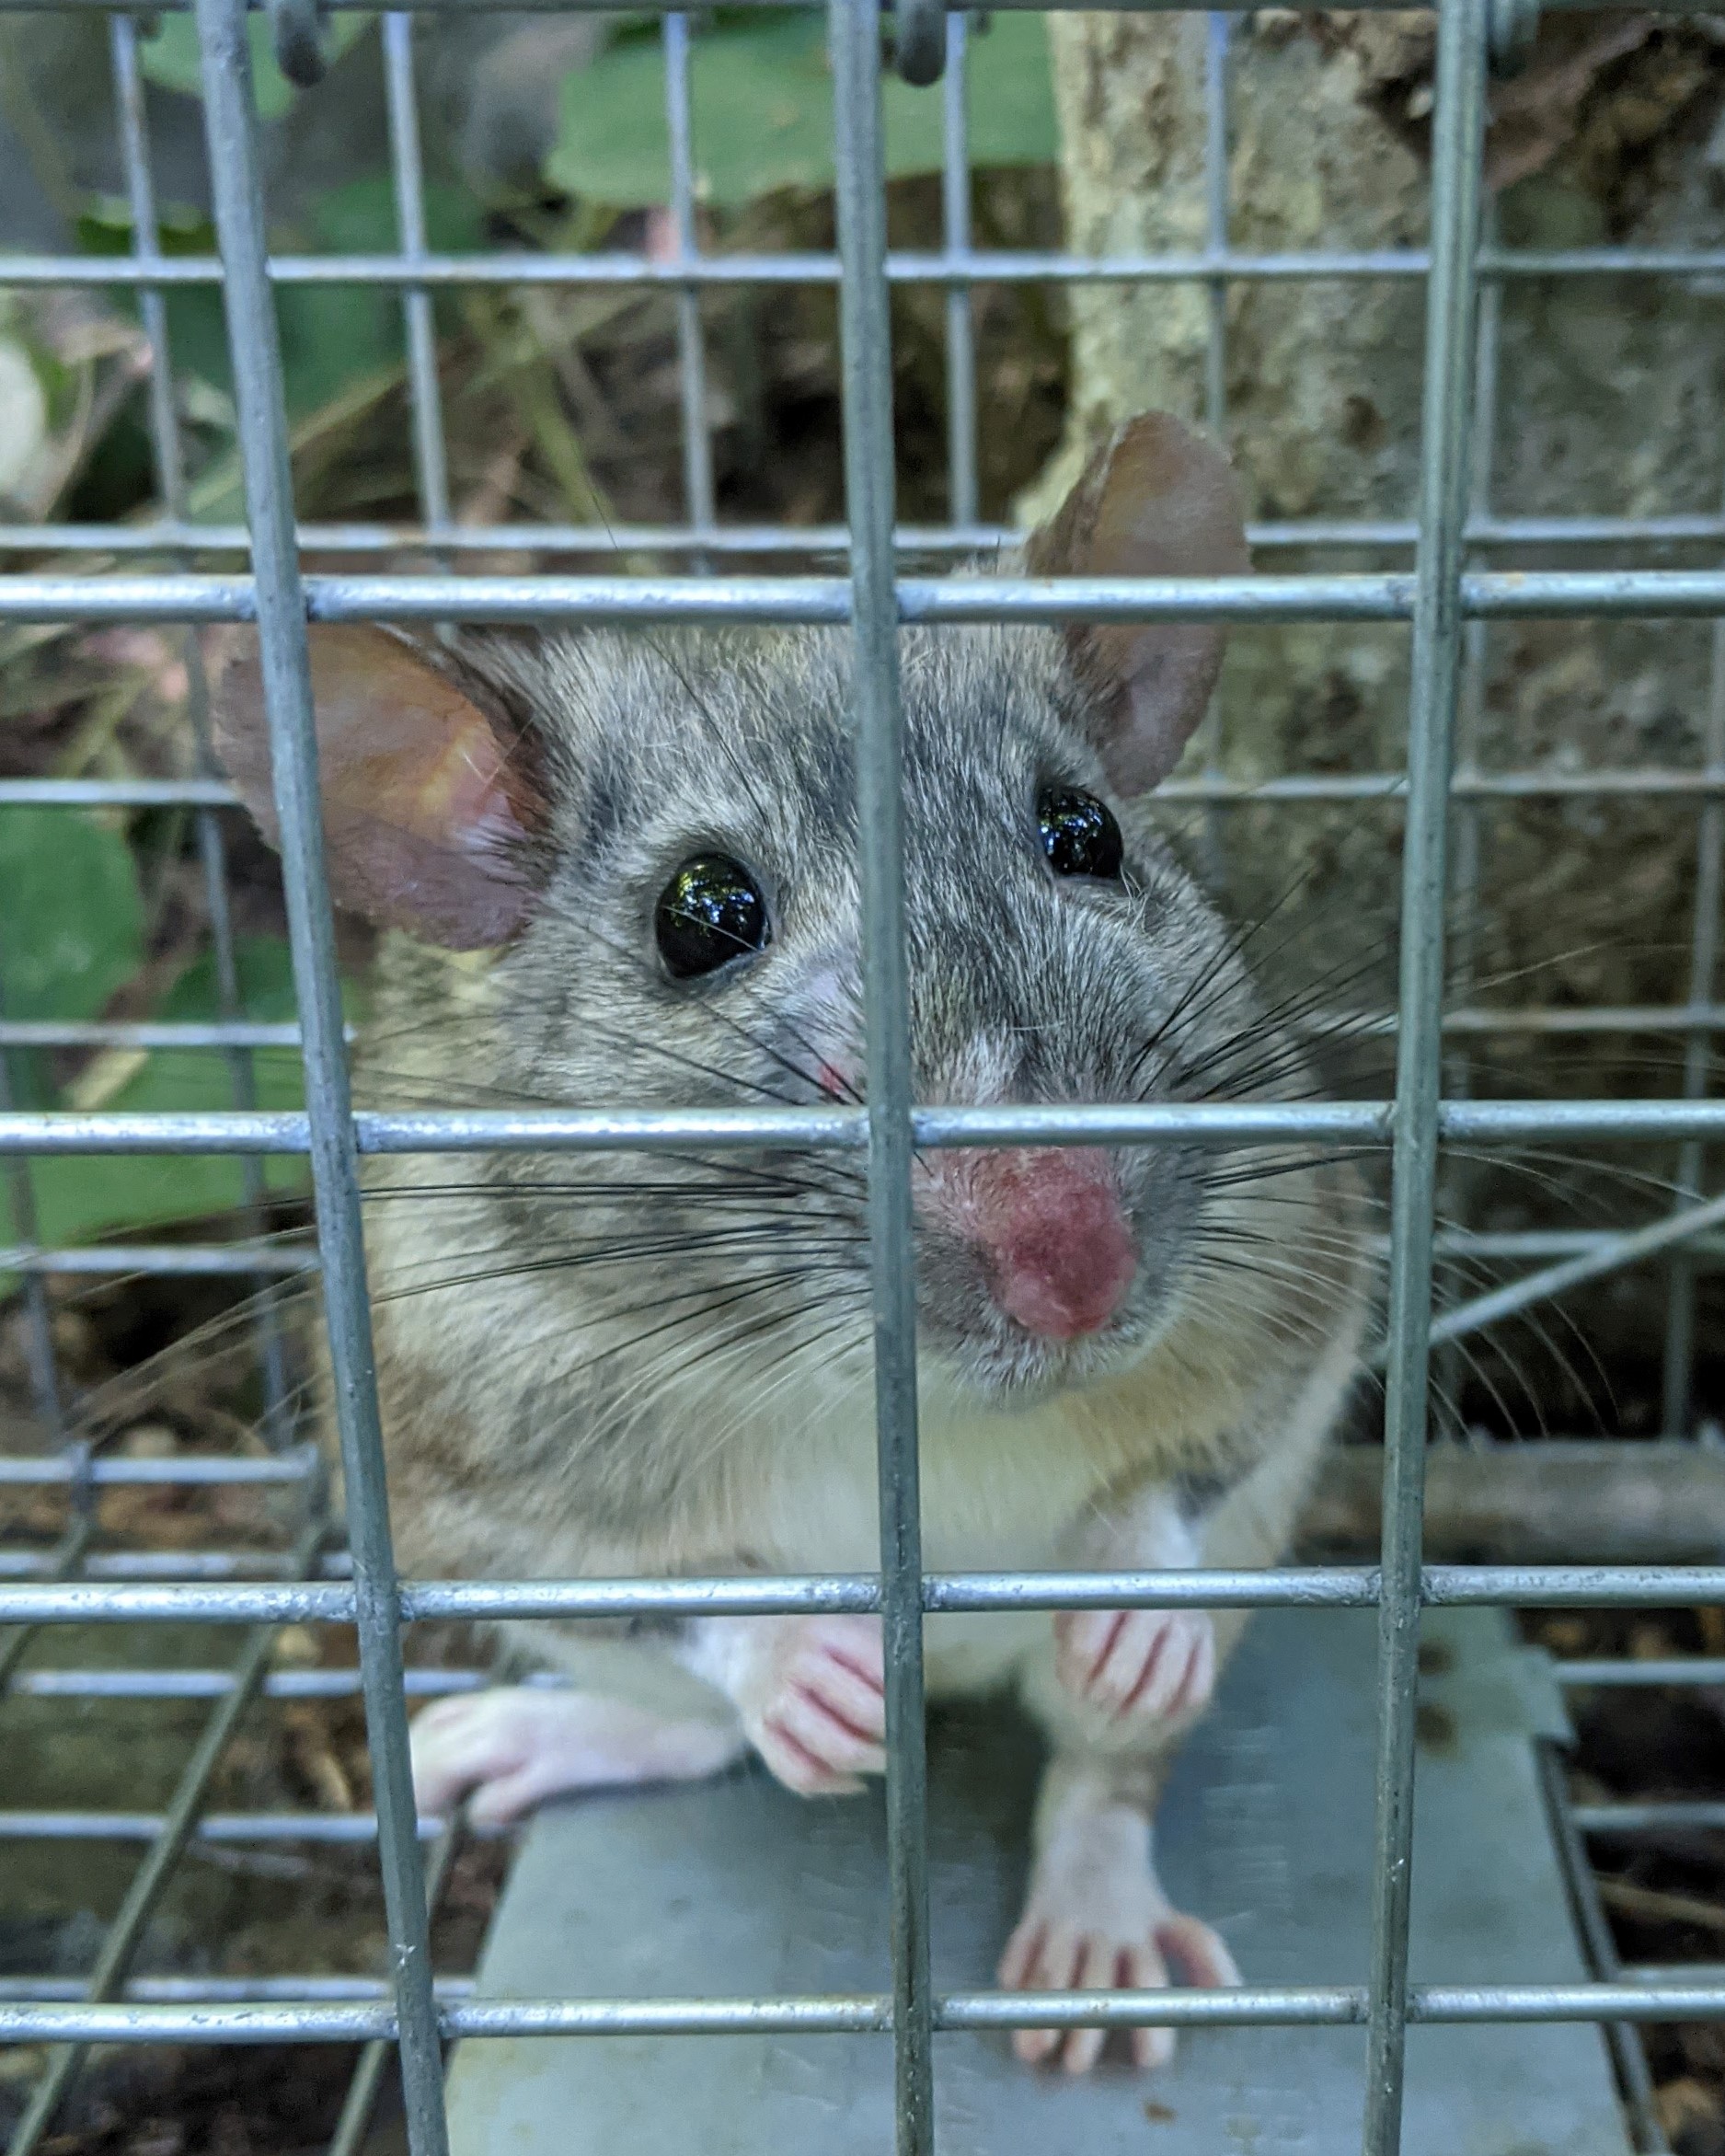 Gray and white mottled rodent with large ears, long feet, and long whiskers